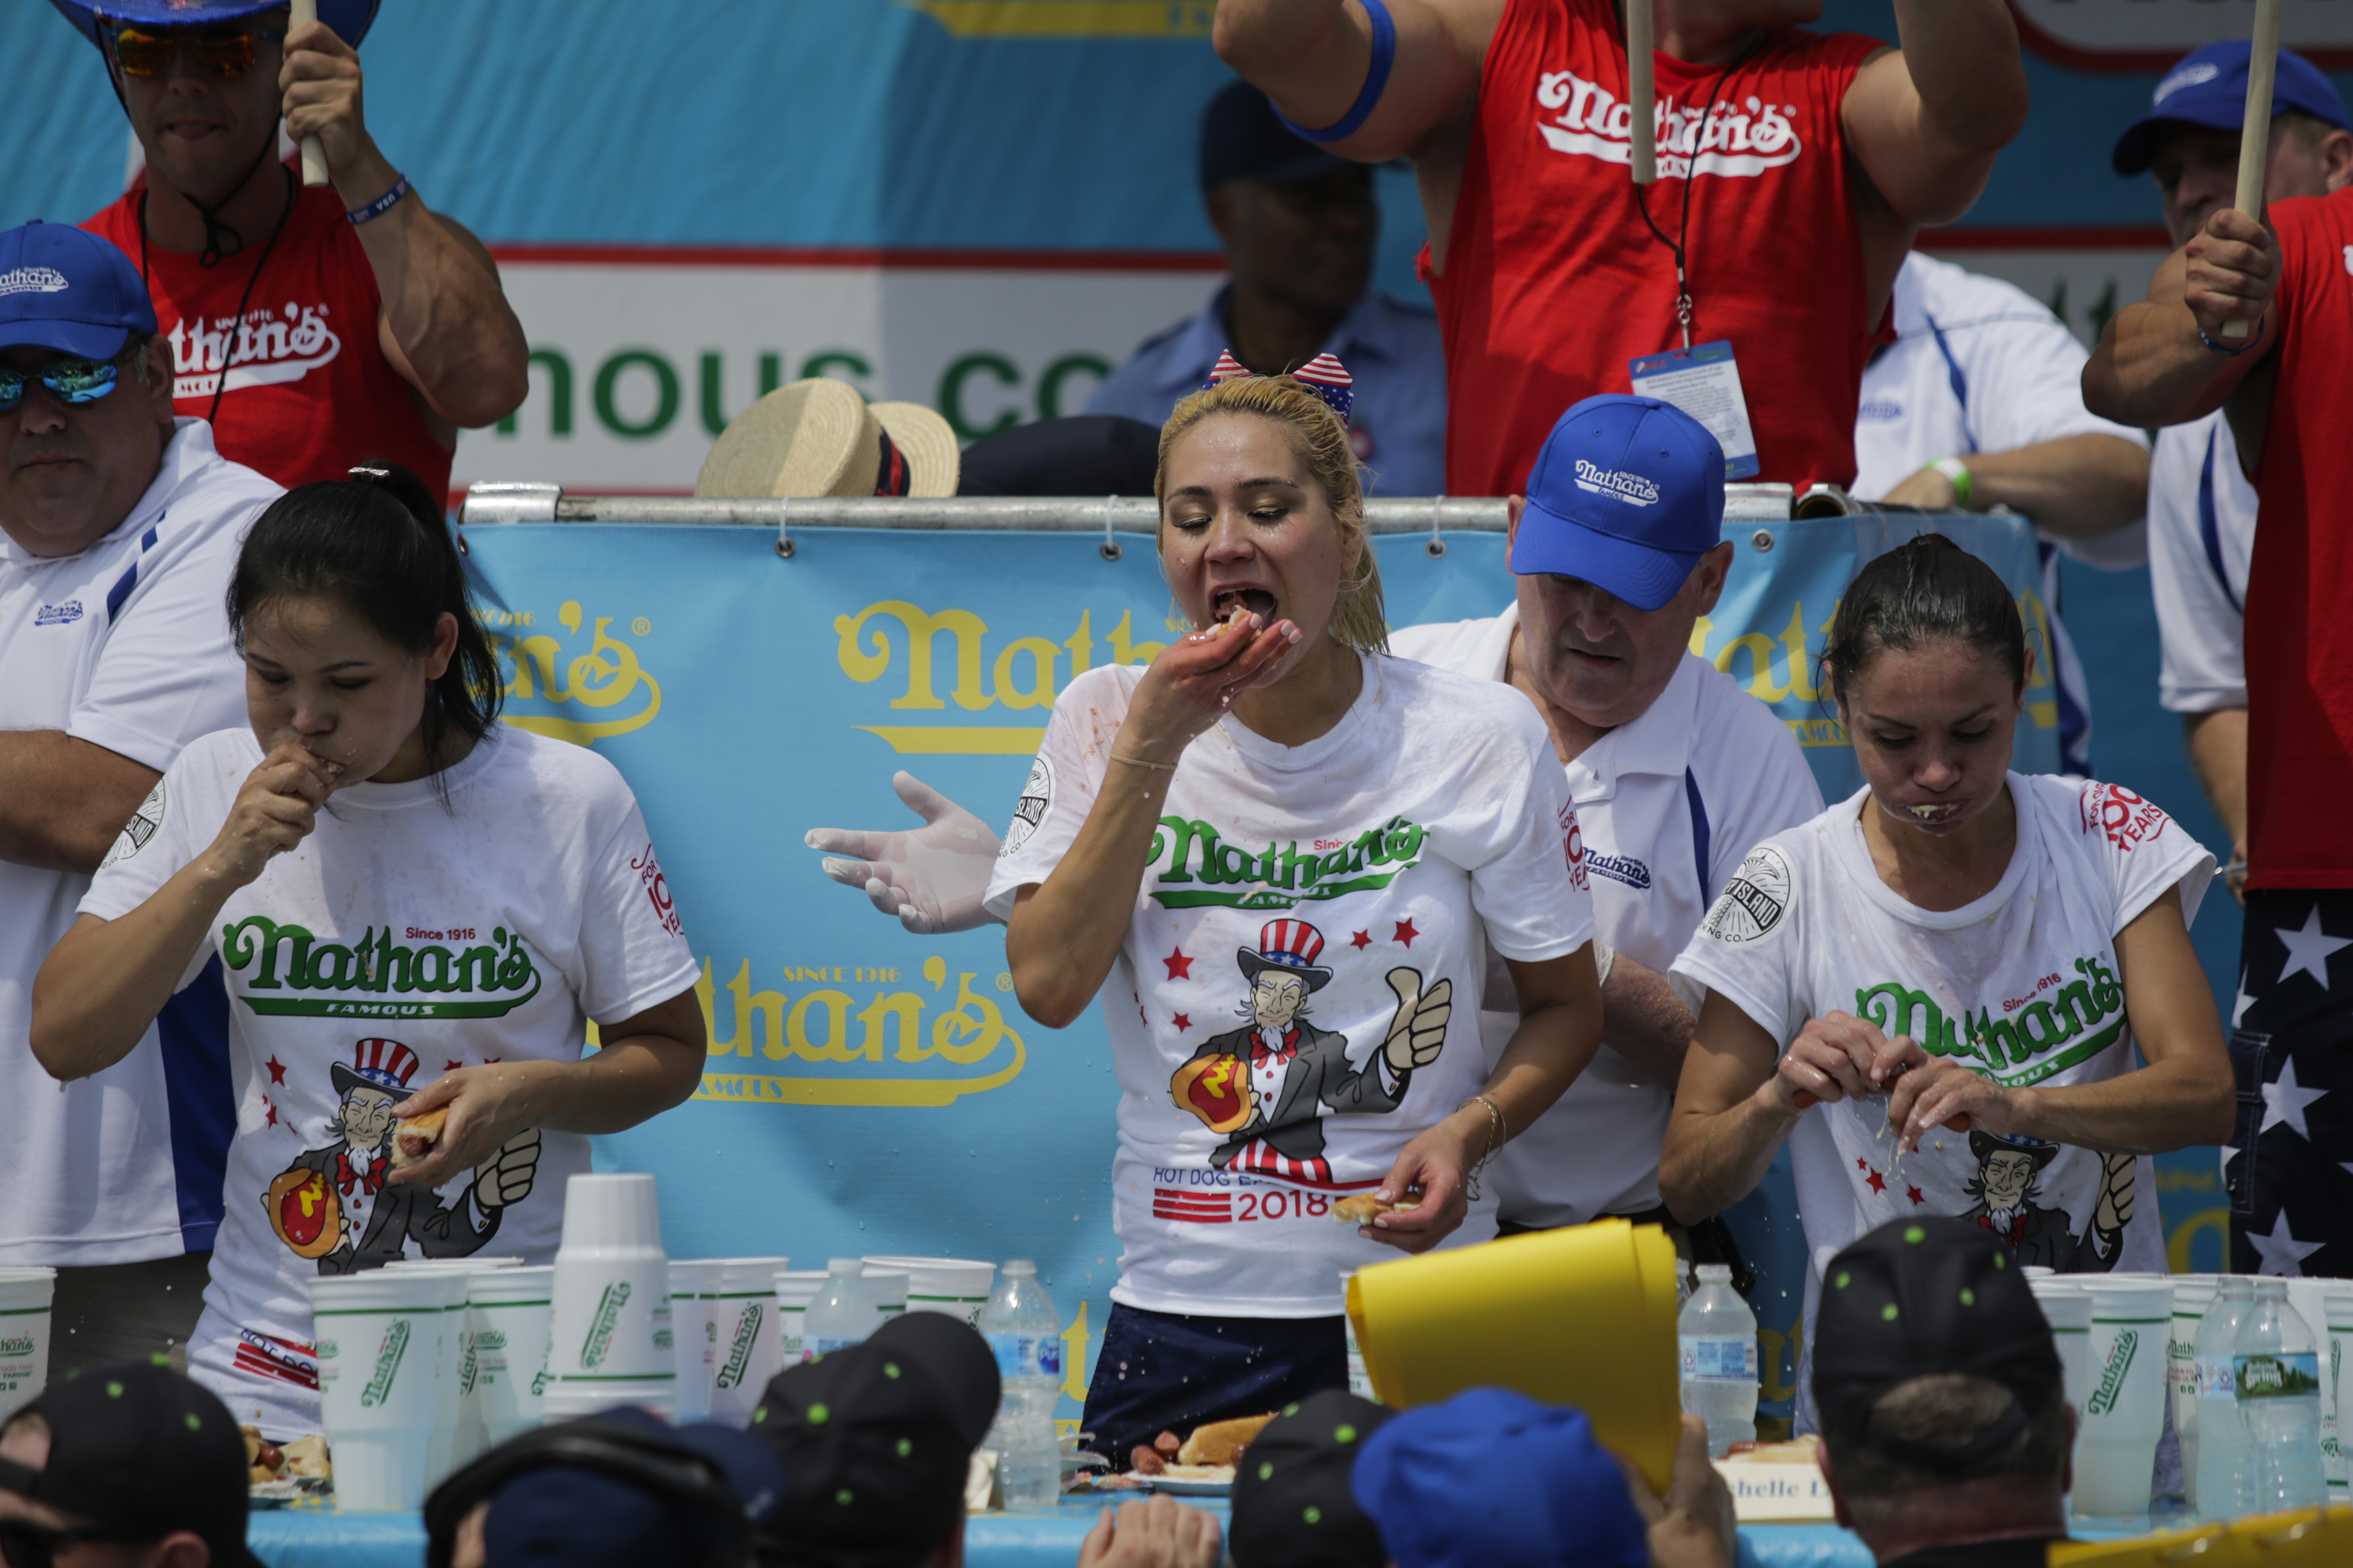 Winner Miki Sudo (C) competes in the women's annual Nathan's Hot Dog Eating Contest on July 4, 2018 in the Coney Island neighborhood of the Brooklyn borough of New York City. Sudo has won the contest 5 years in a row. (Eduardo Munoz Alvarez – Getty Images)